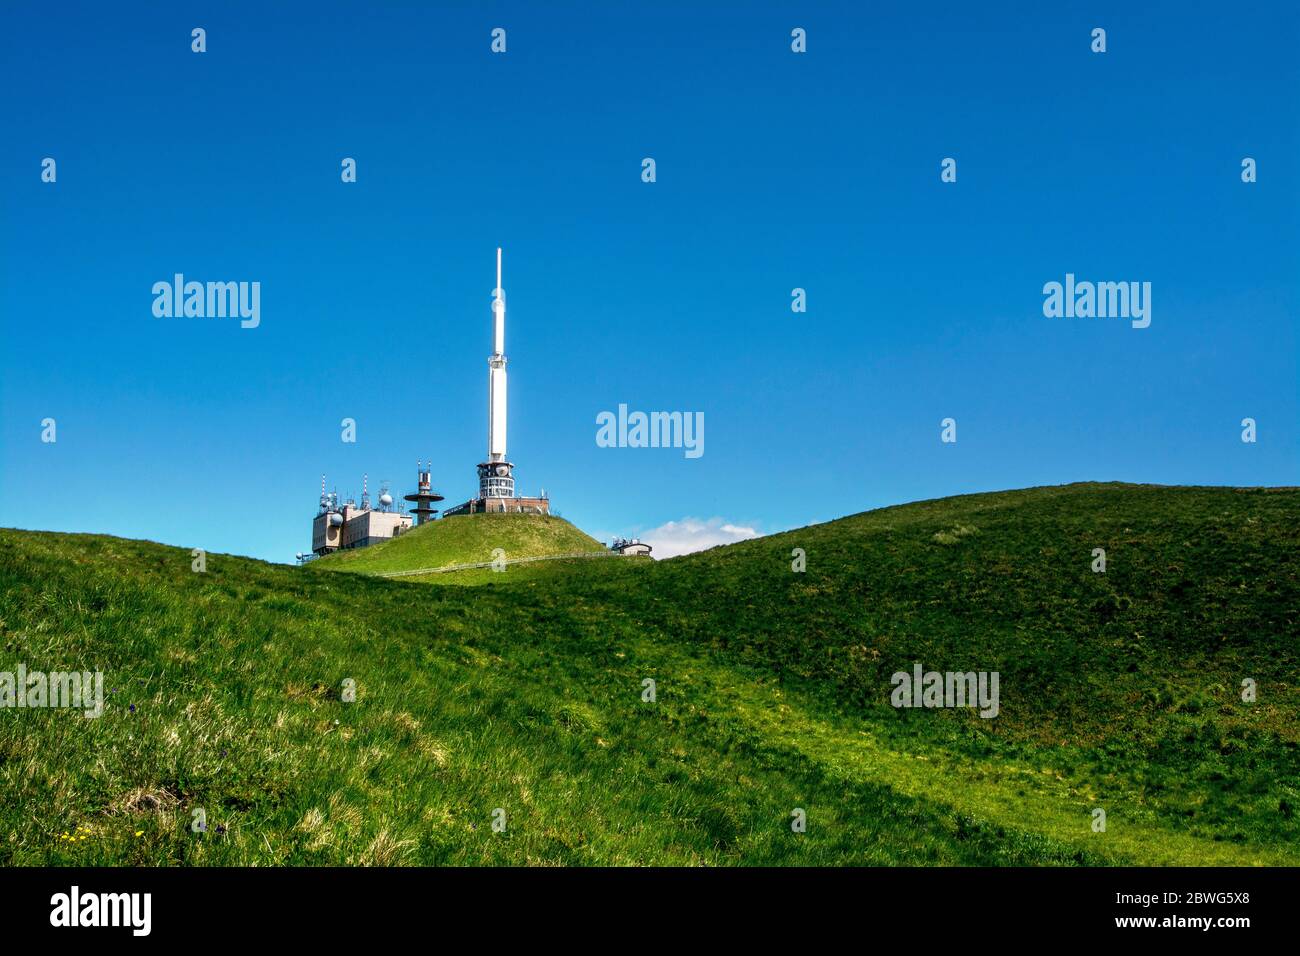 Meteorological observatory and Transmitter TV at the summit of Puy de Dome,  Regional natural park of Auvergne Volcanoes, Unesco World heritage, Puy d Stock Photo